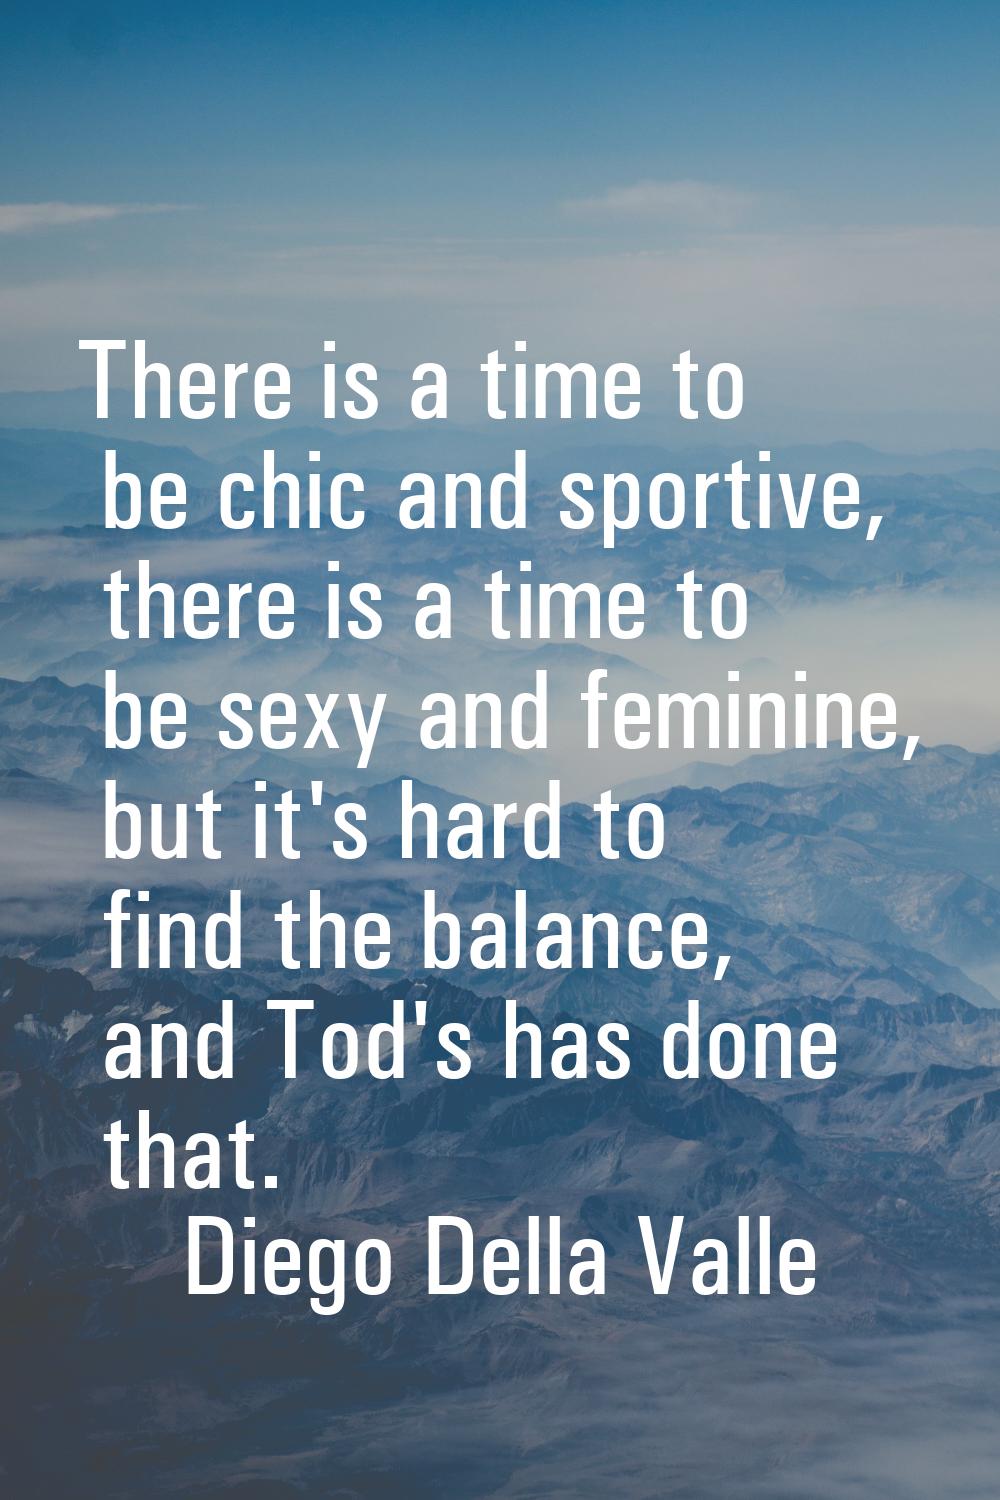 There is a time to be chic and sportive, there is a time to be sexy and feminine, but it's hard to 